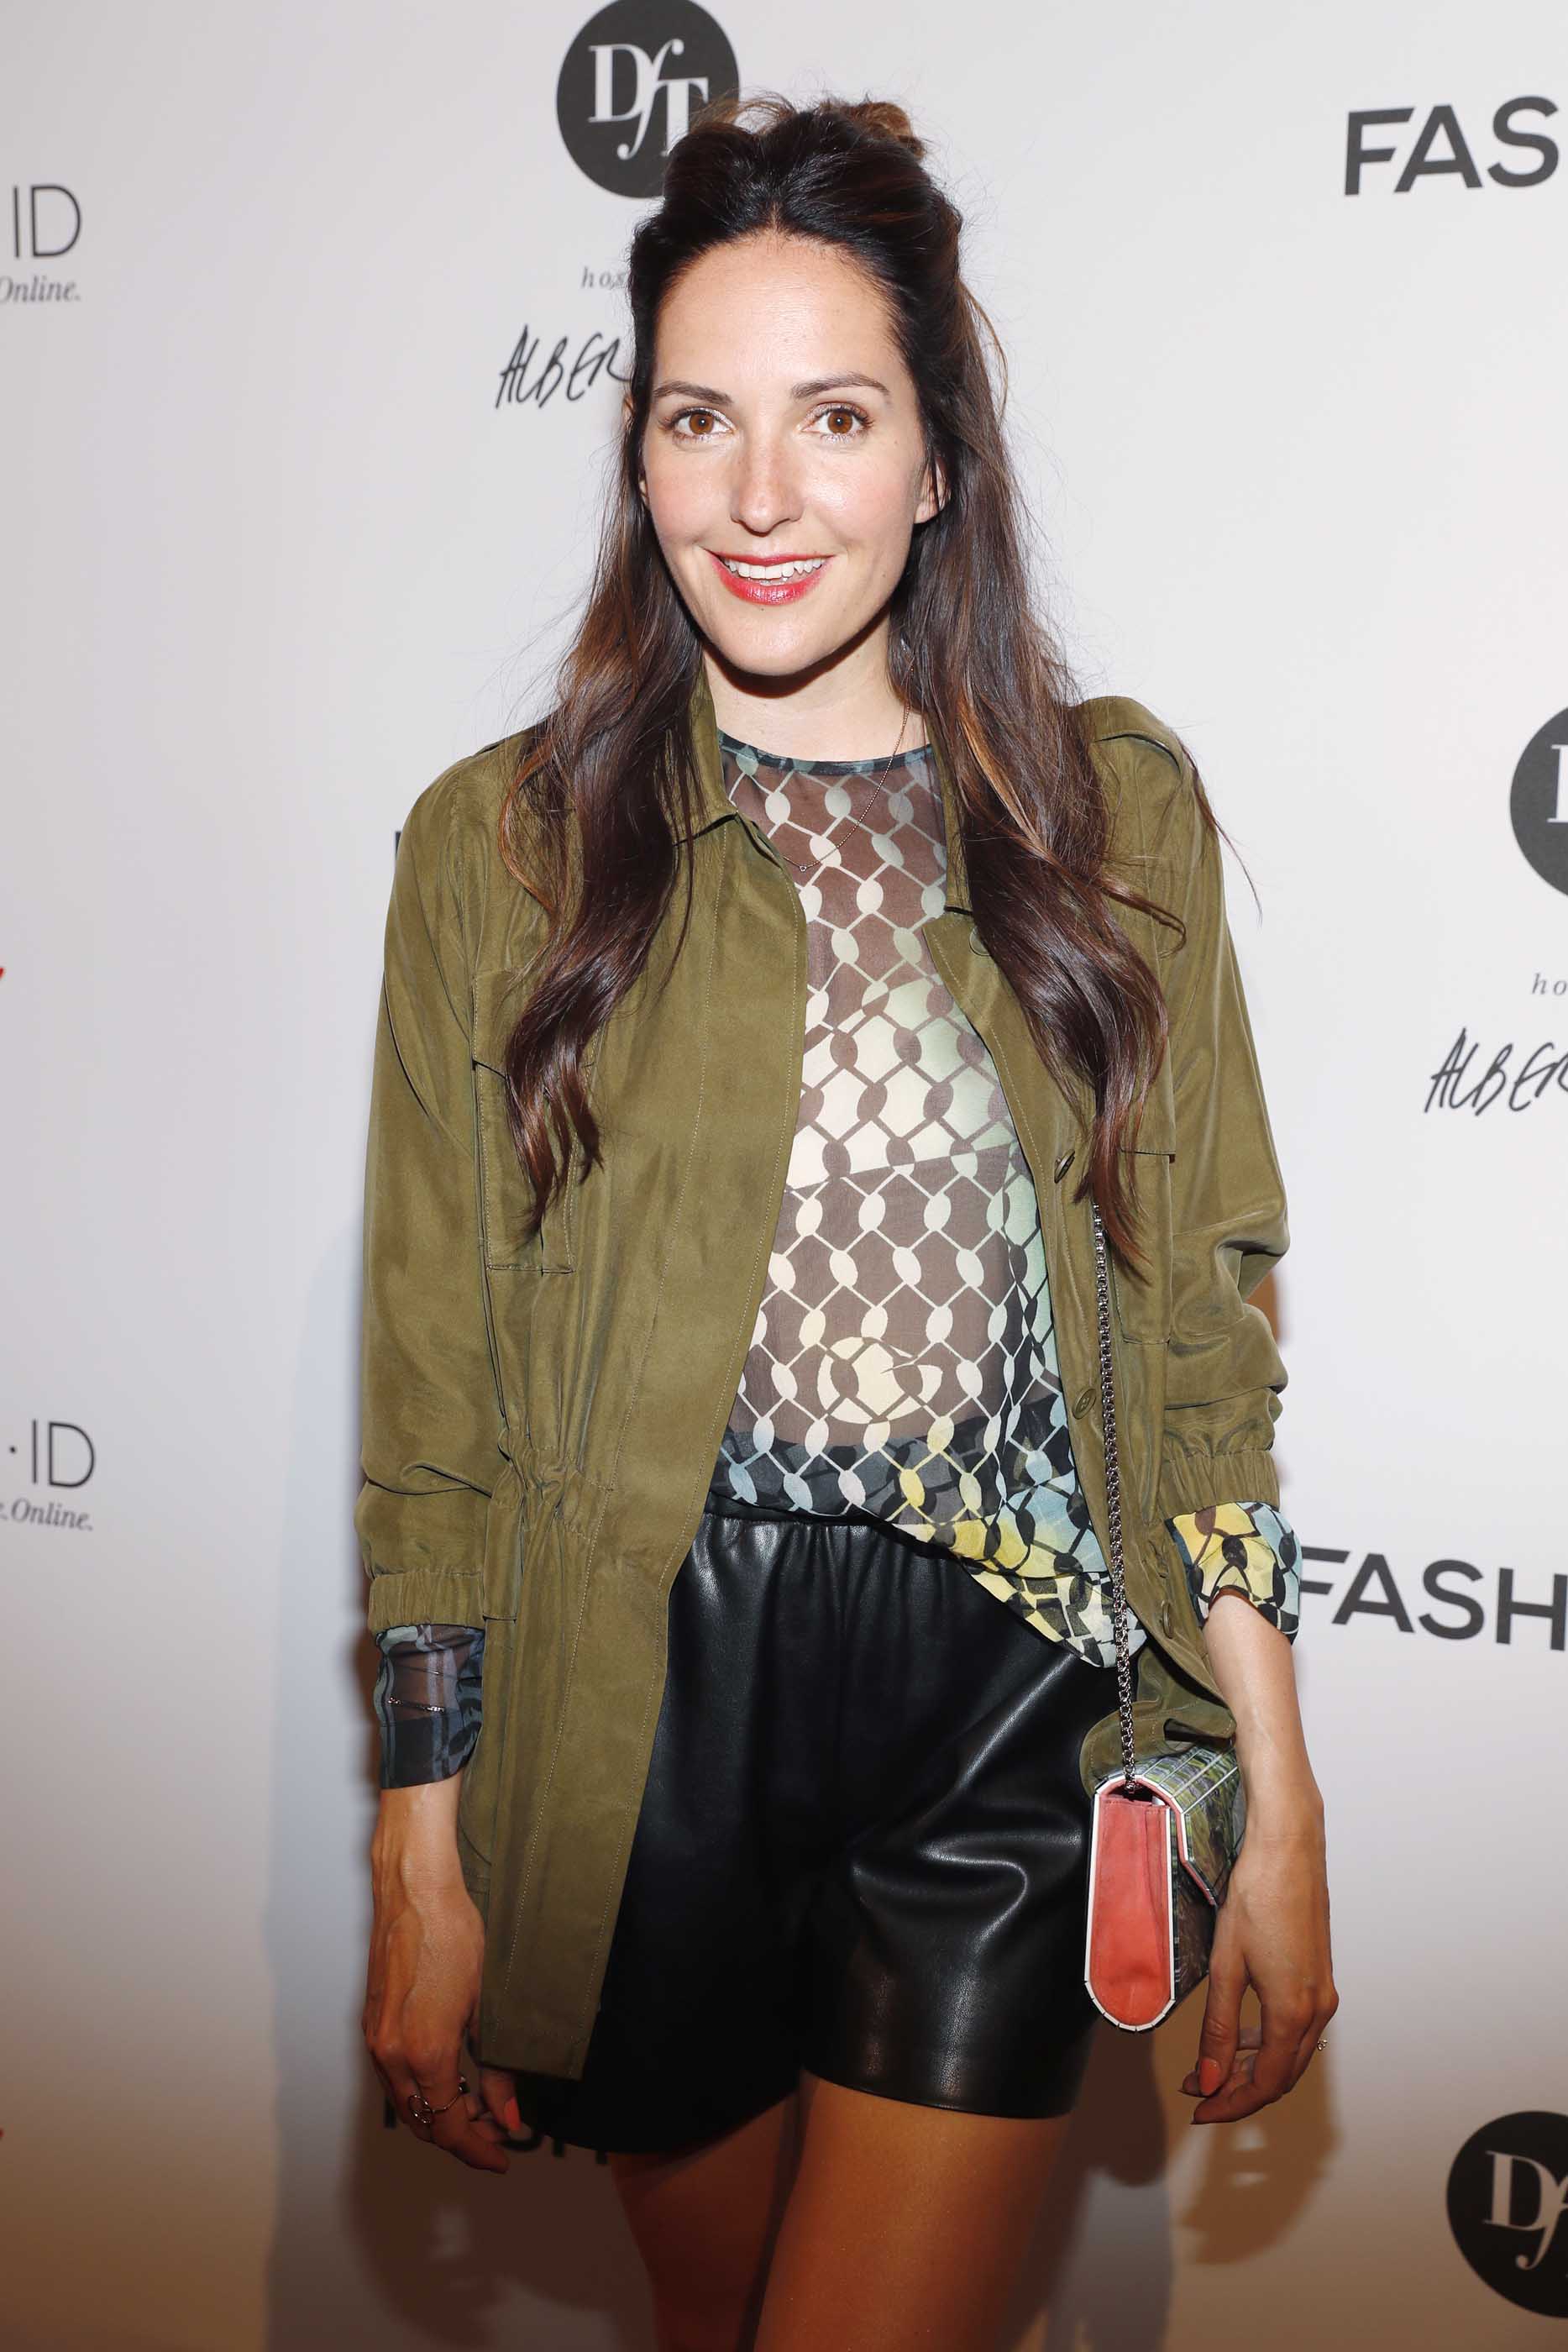 Johanna Klum attends the ‘Designer for Tomorrow’ after show party